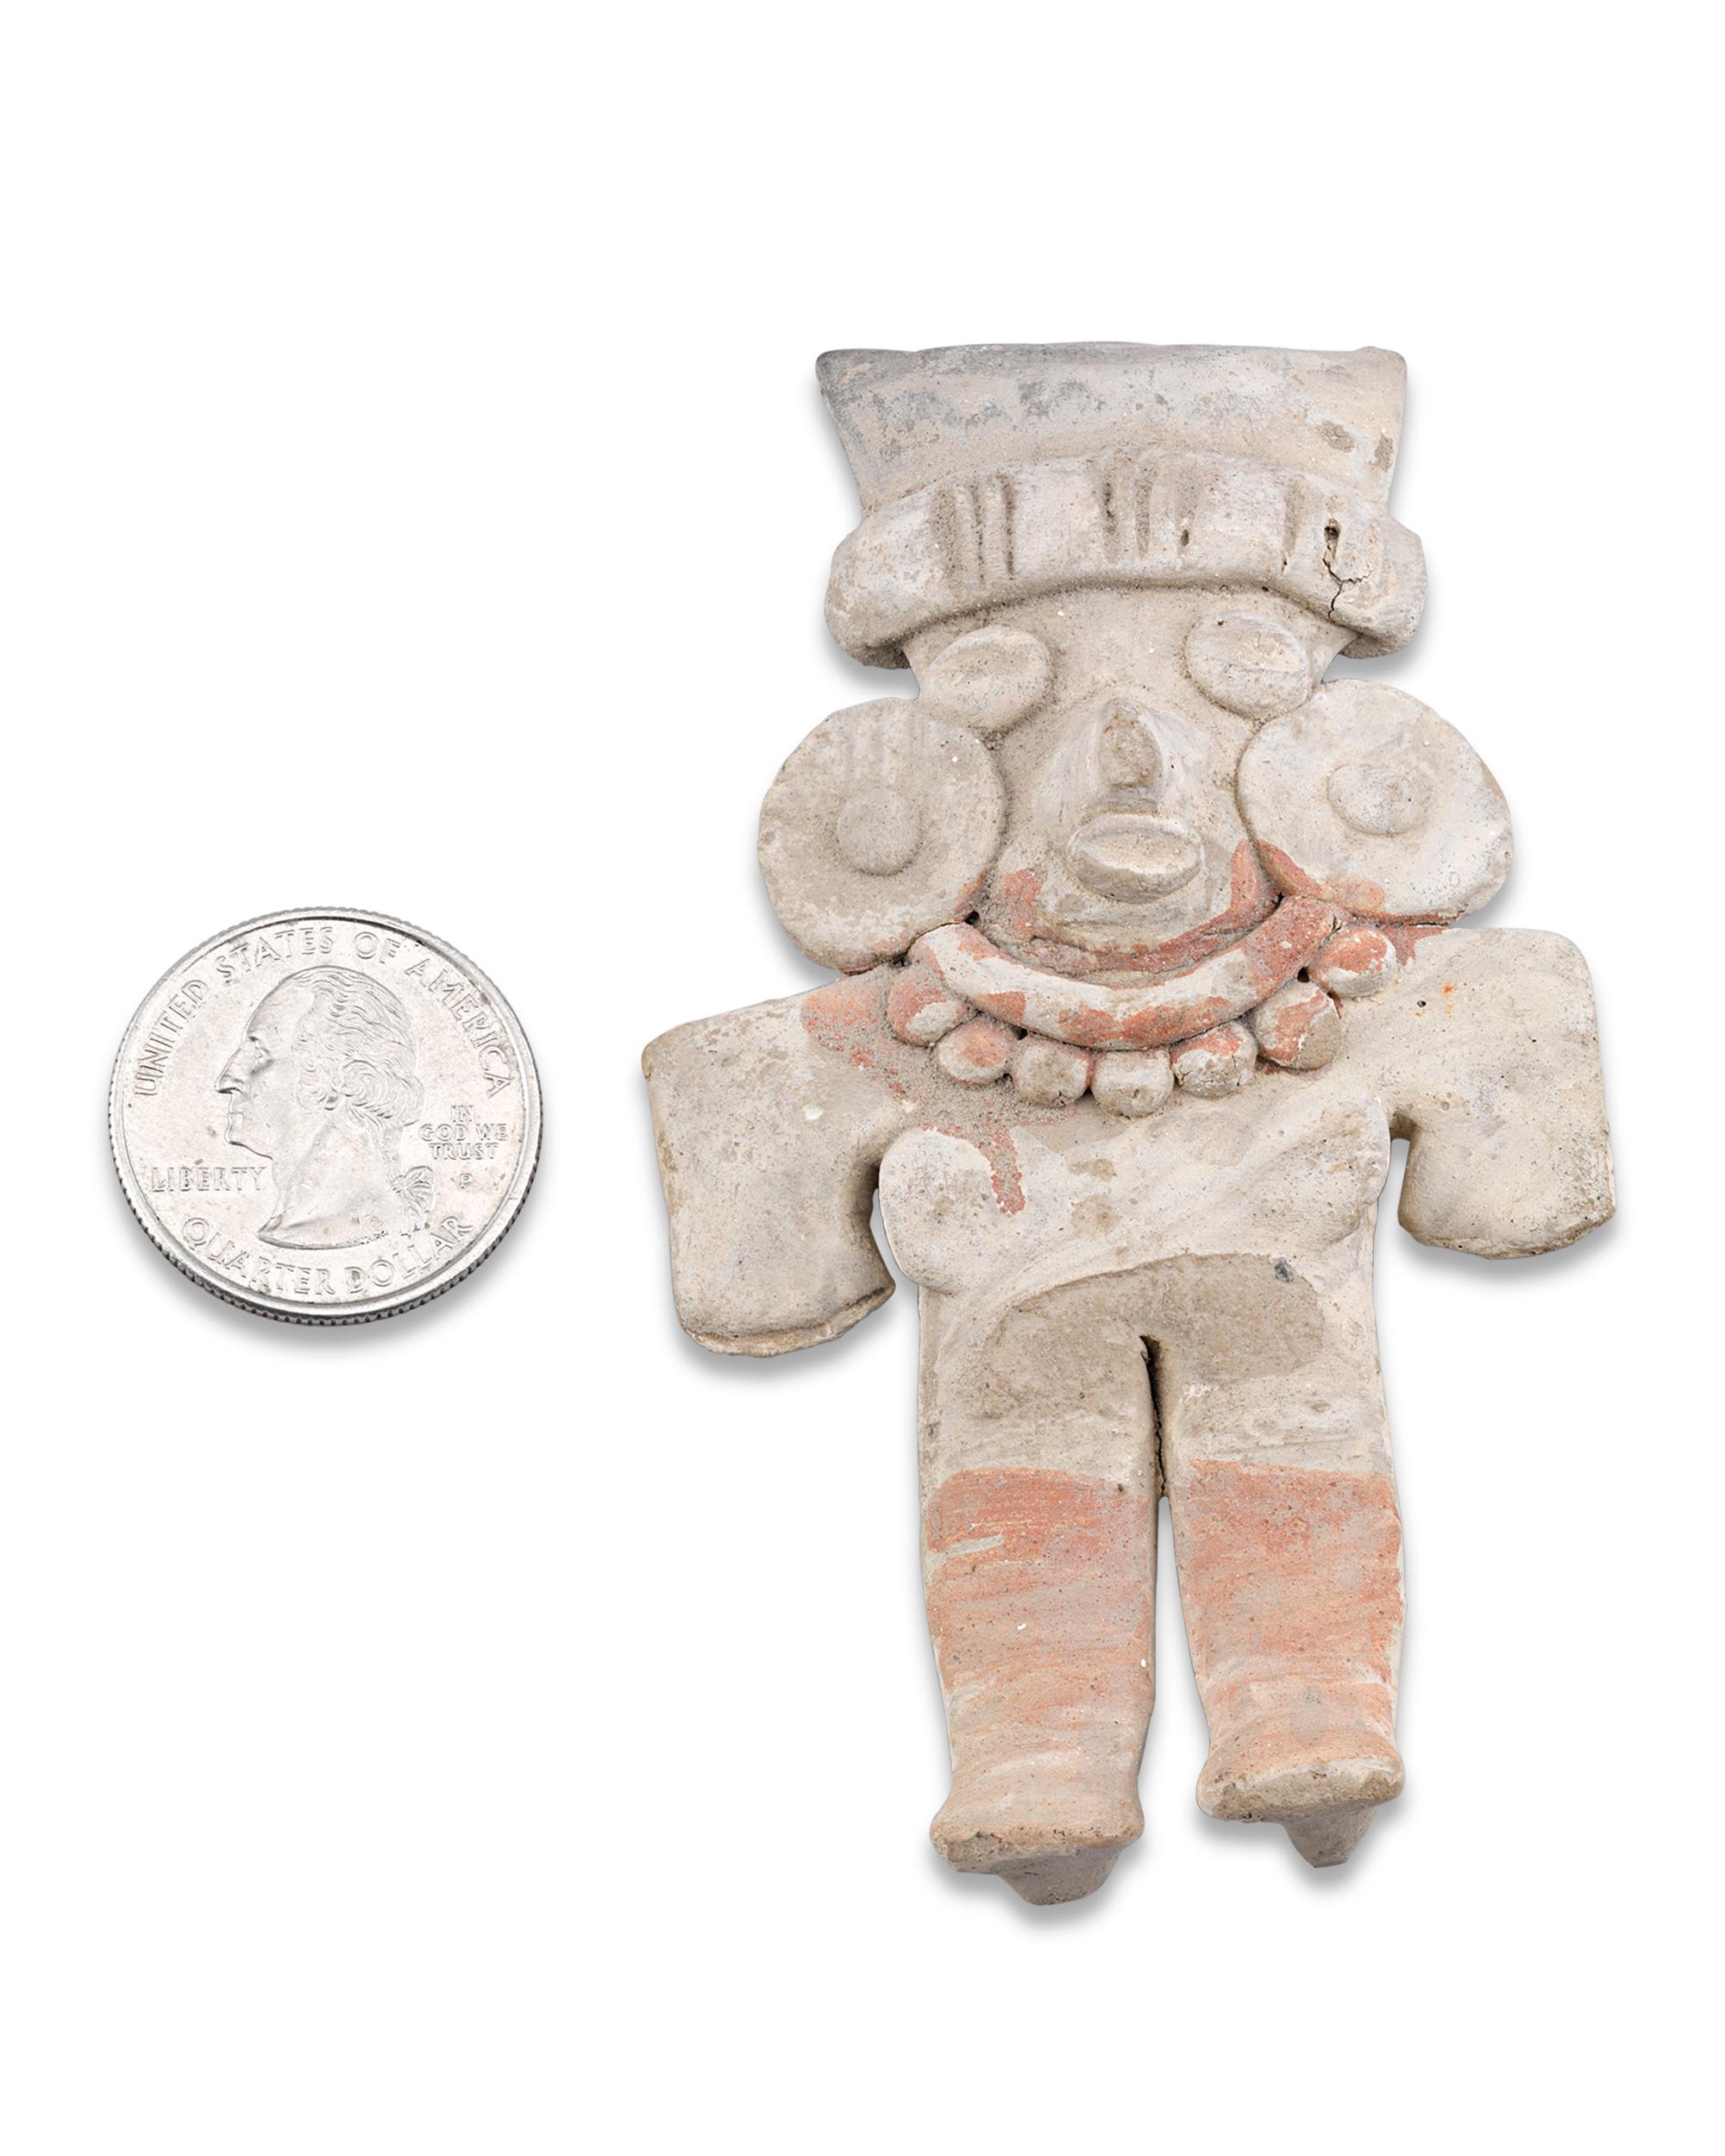 This lovely Chupicuaro lady wears an elaborate coiffure, large ear plugs, and a beaded jade necklace, all of which were highly prized by Chupicuaro nobility. The figure's coffee-bean shaped eyes and overall flatness are also characteristic of pieces